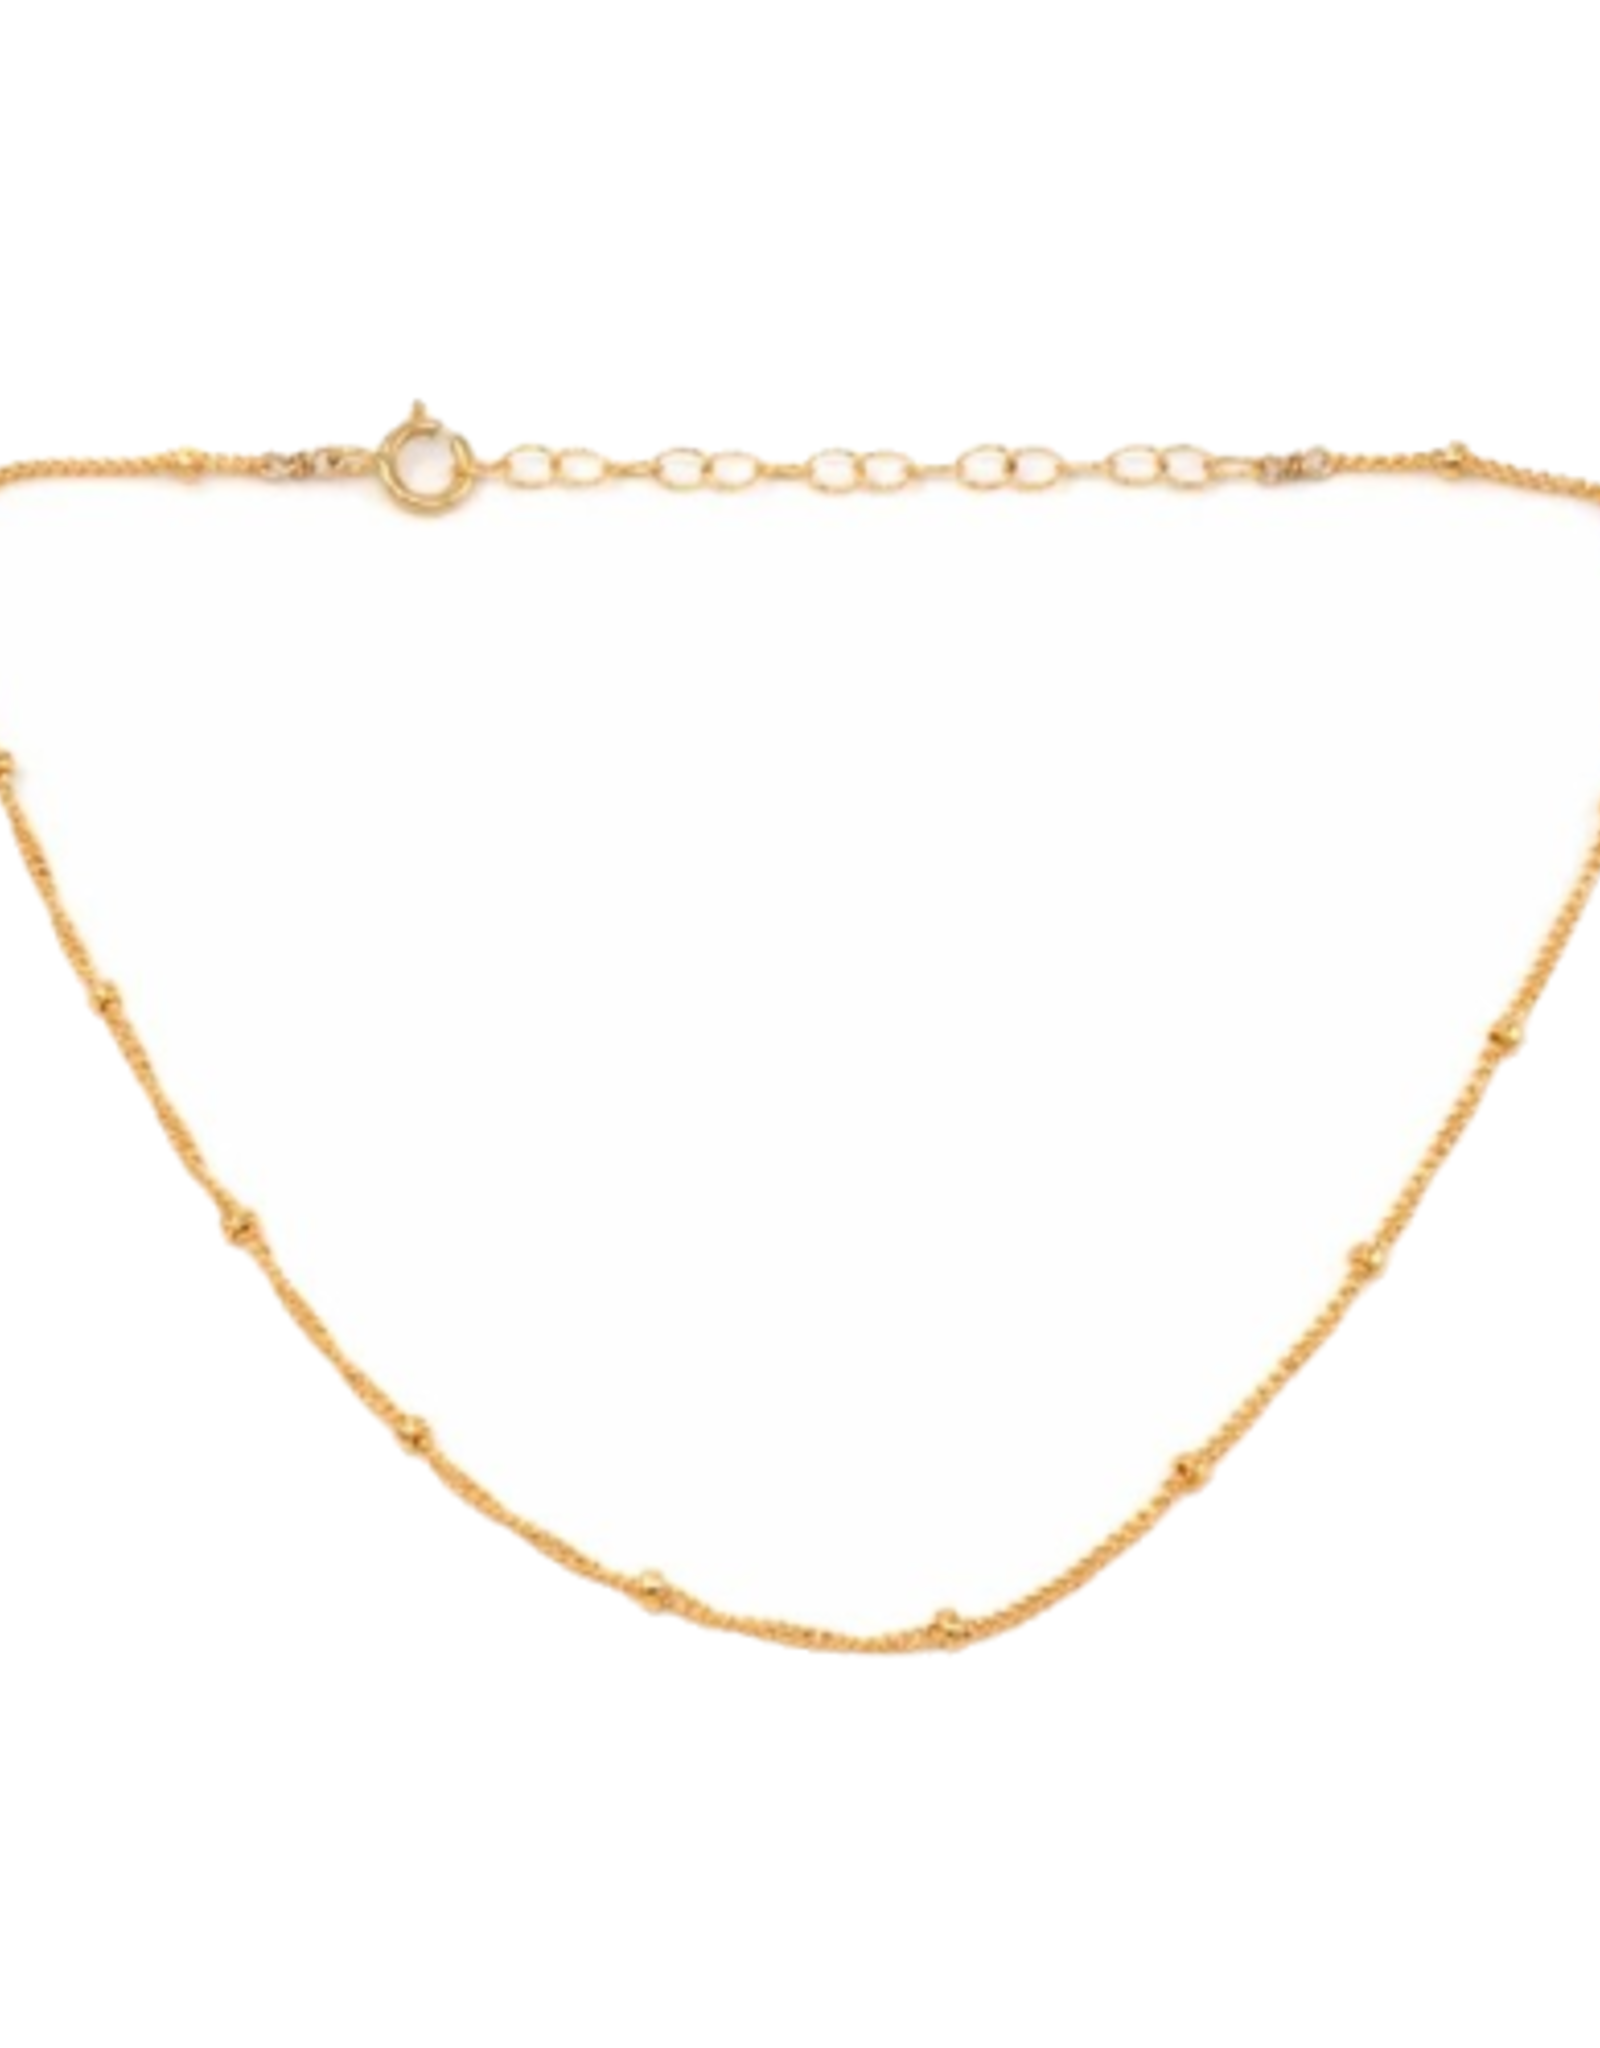 Anklet Small Rounded Beads on Chain Gold Fill